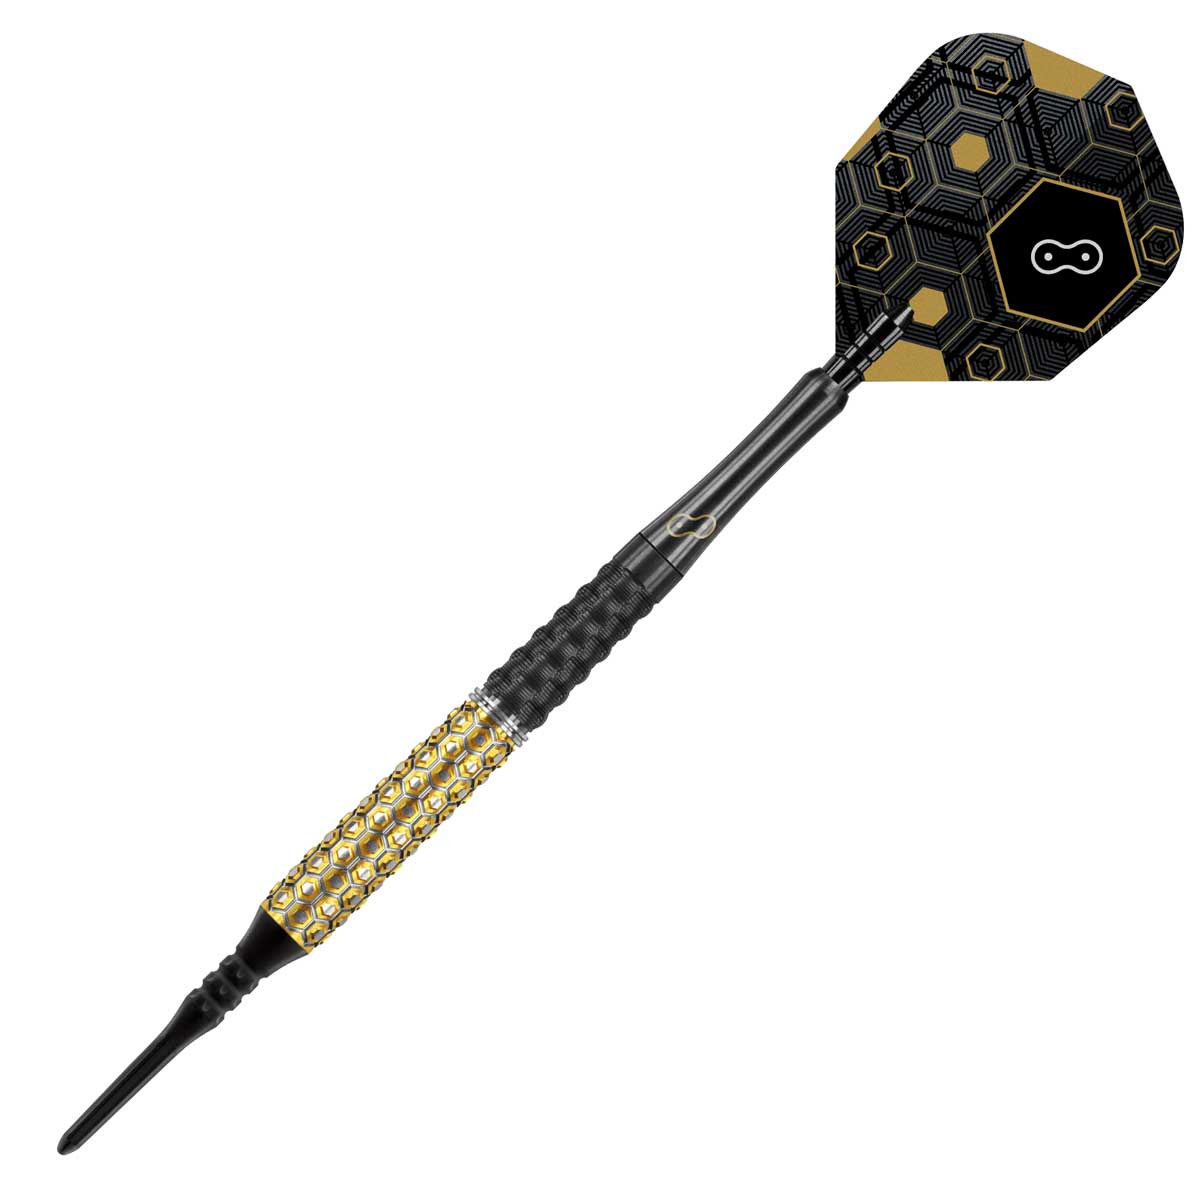 Target Elysian 4 Soft Tip Darts 18g ONLY 200 SETS IN THE WORLD